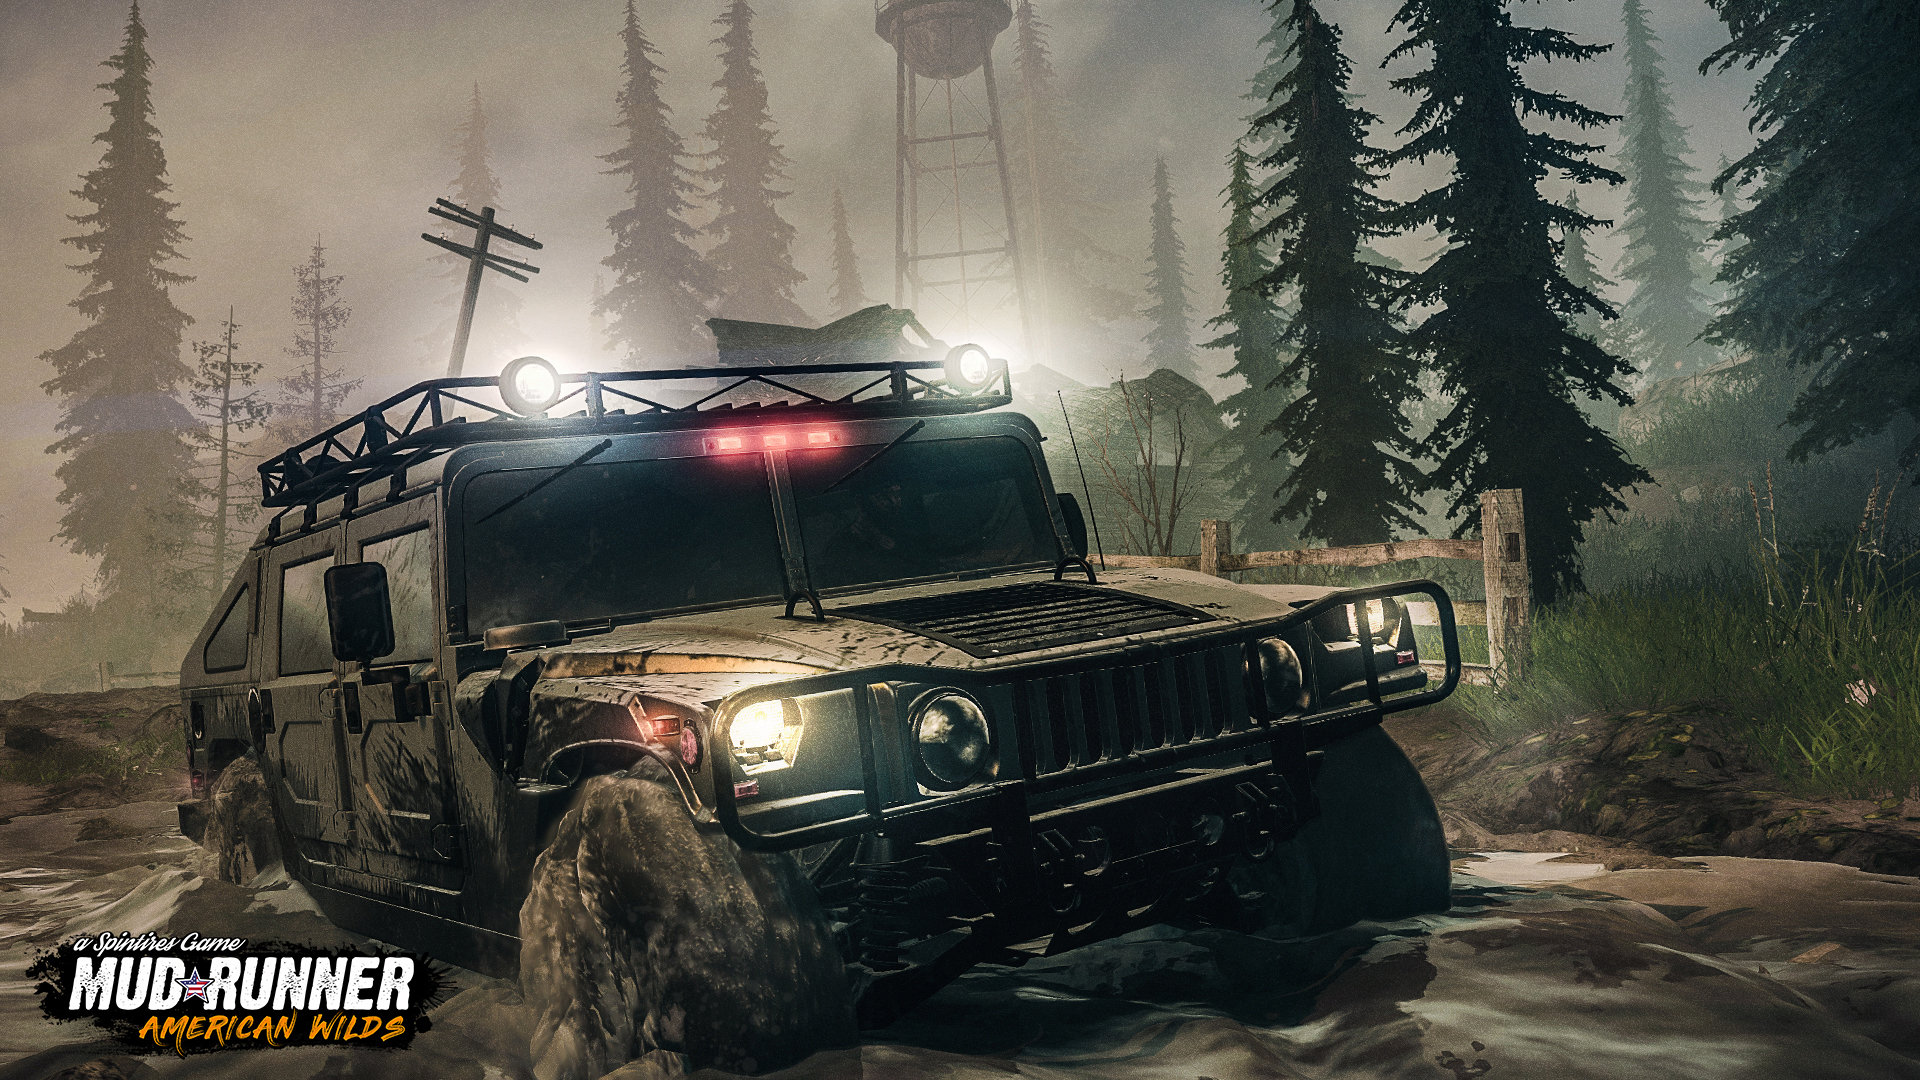 Mad runner expedition. Игра Spin Tires MUDRUNNER. SPINTIRES Mud Runner. SPINTIRES: MUDRUNNER - American Wilds. MUDRUNNER American Wilds Edition.